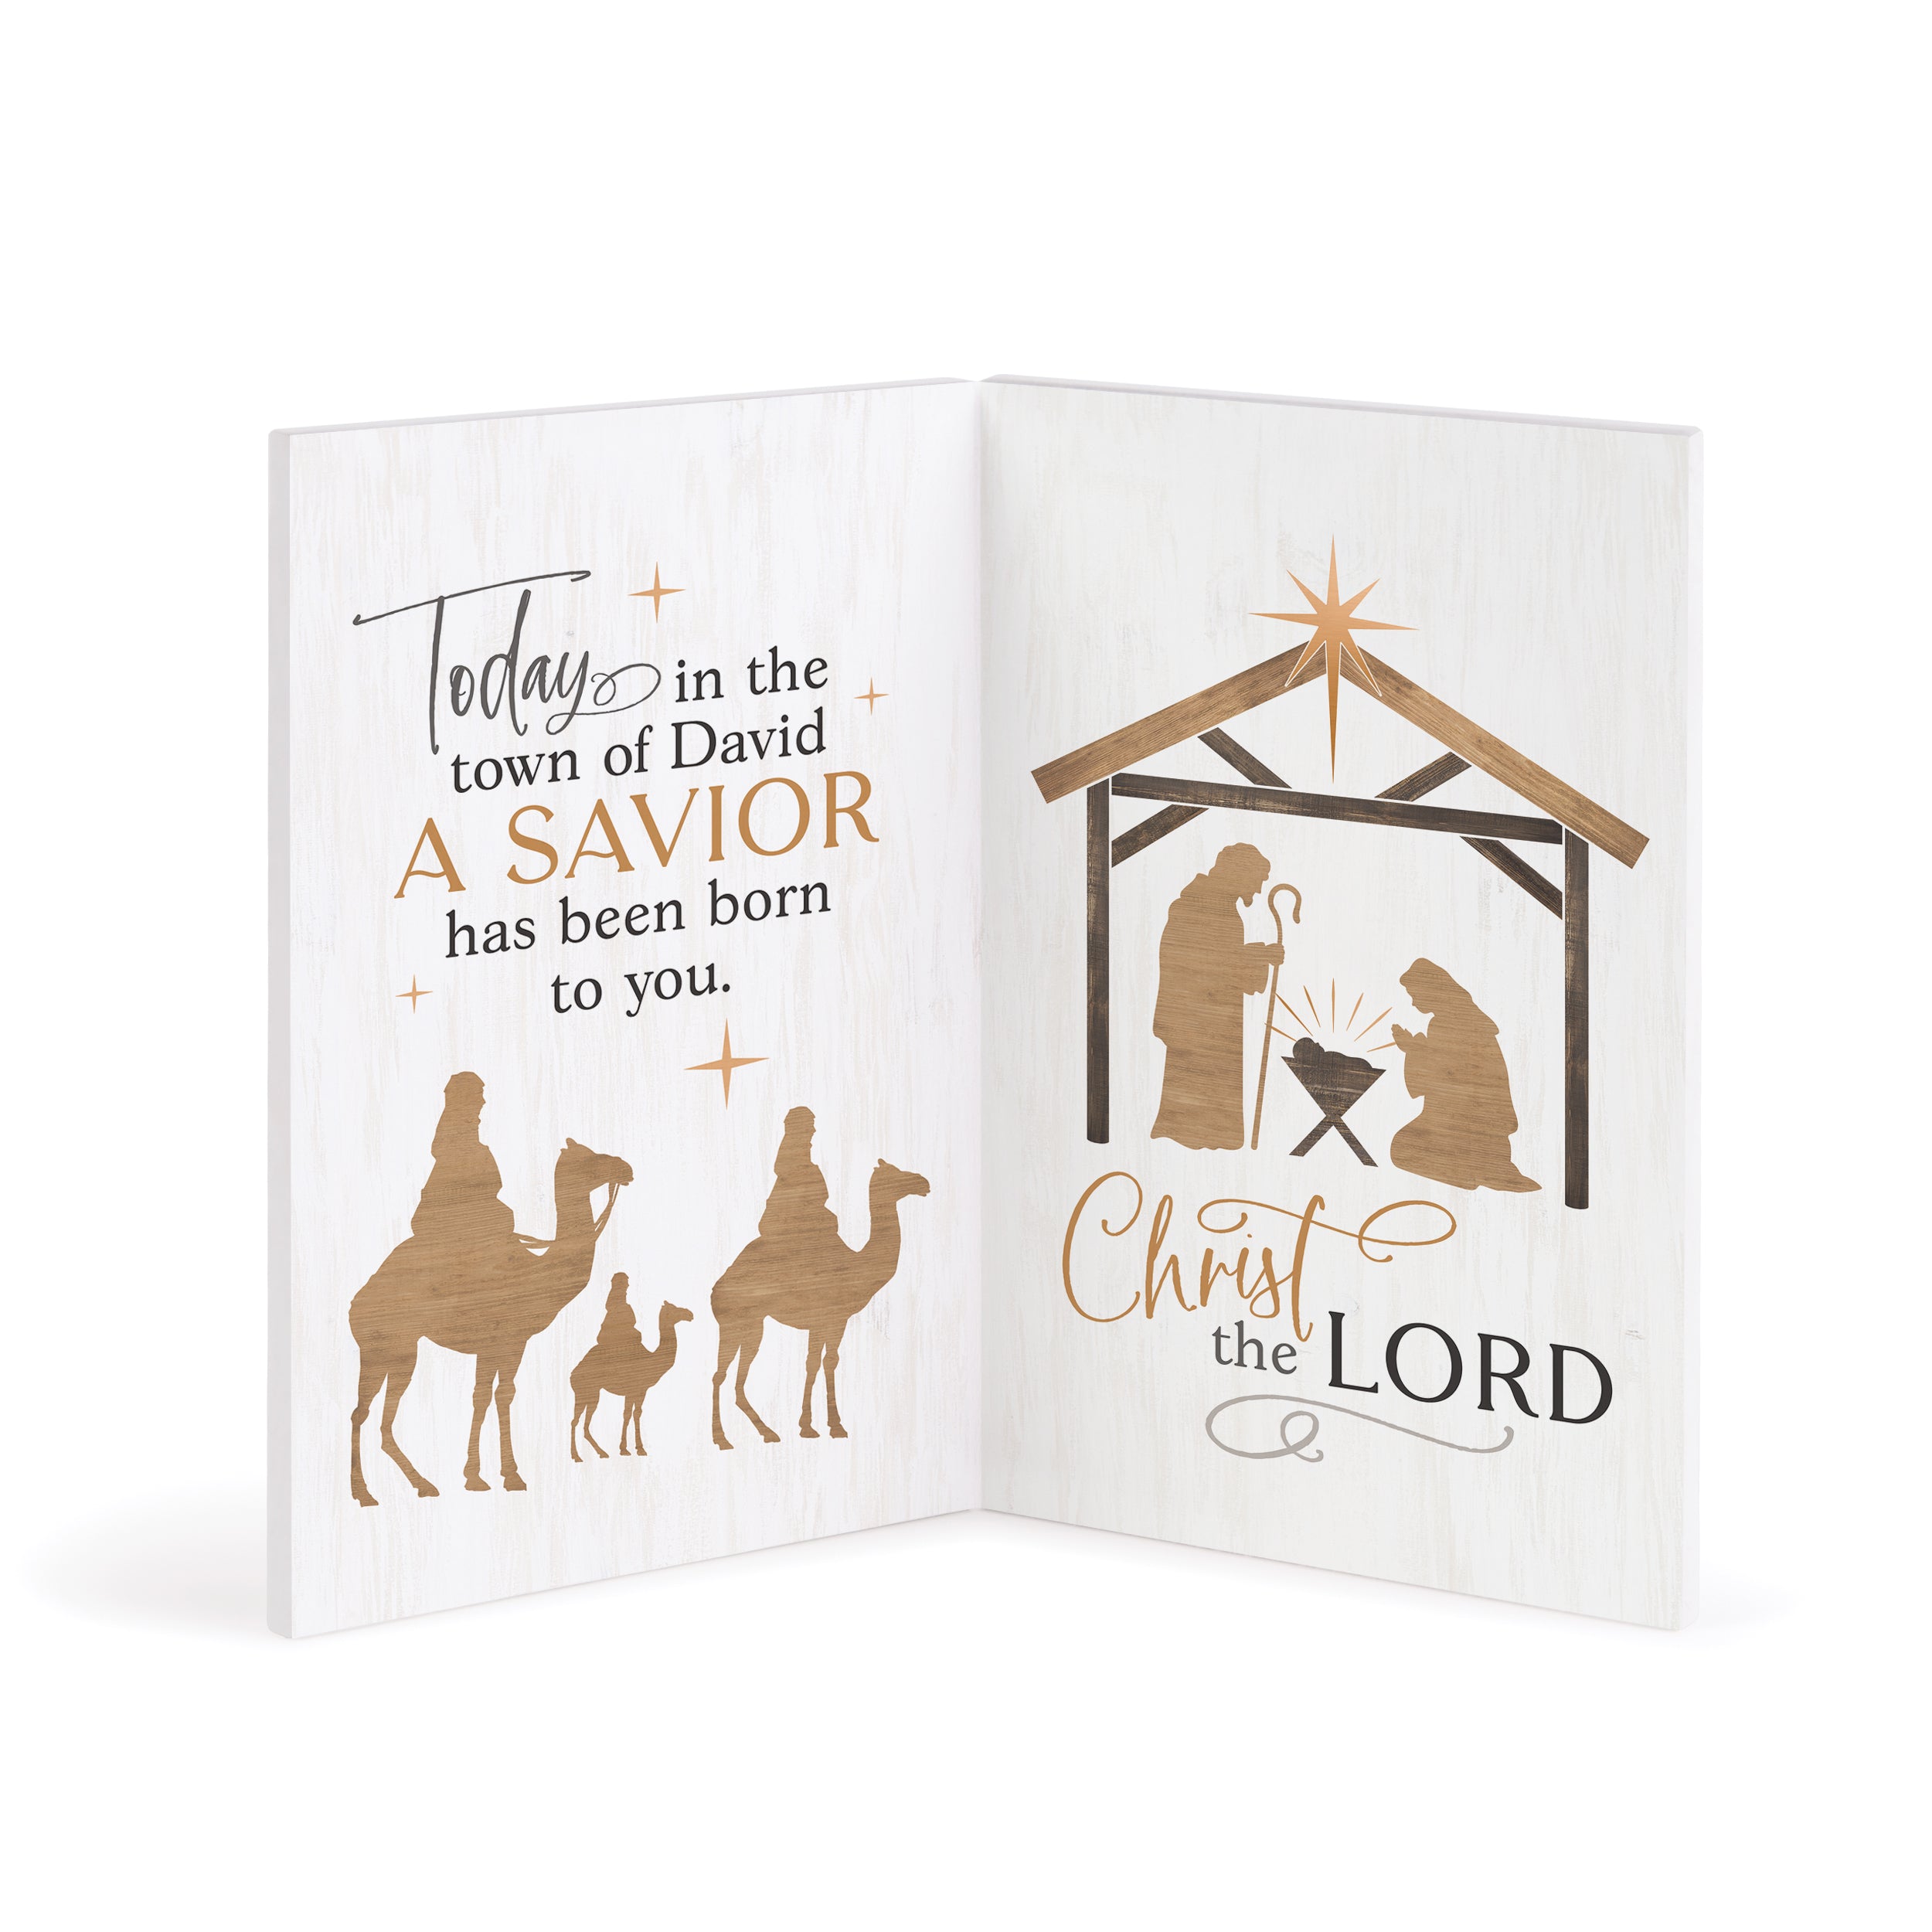 For Unto Us A Child Is Born Wooden Keepsake Card